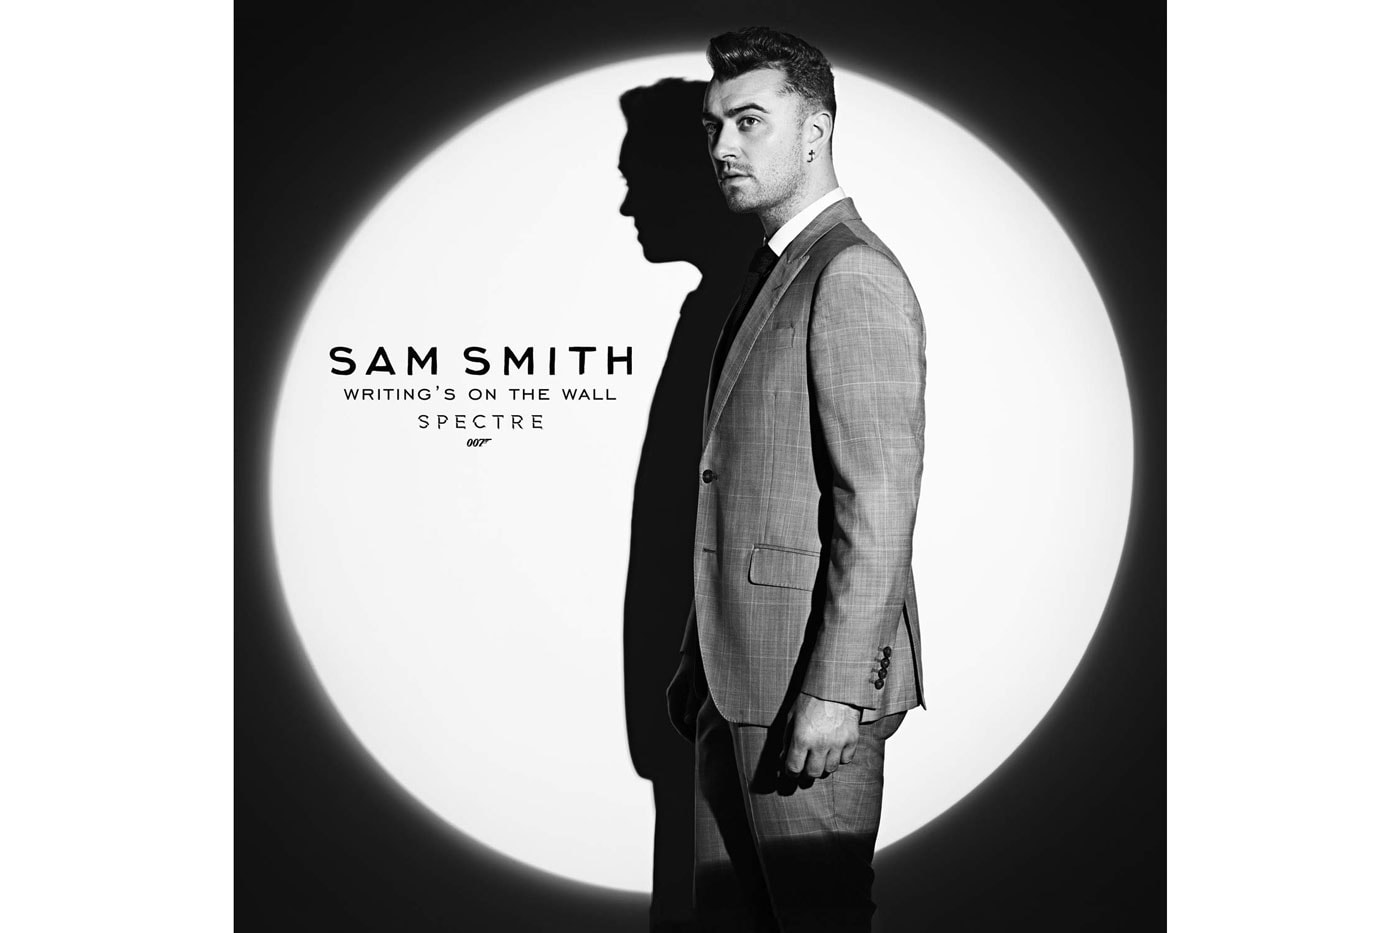 Listen to Sam Smith's James Bond 'Spectre' Theme Song, "Writing's On the Wall"